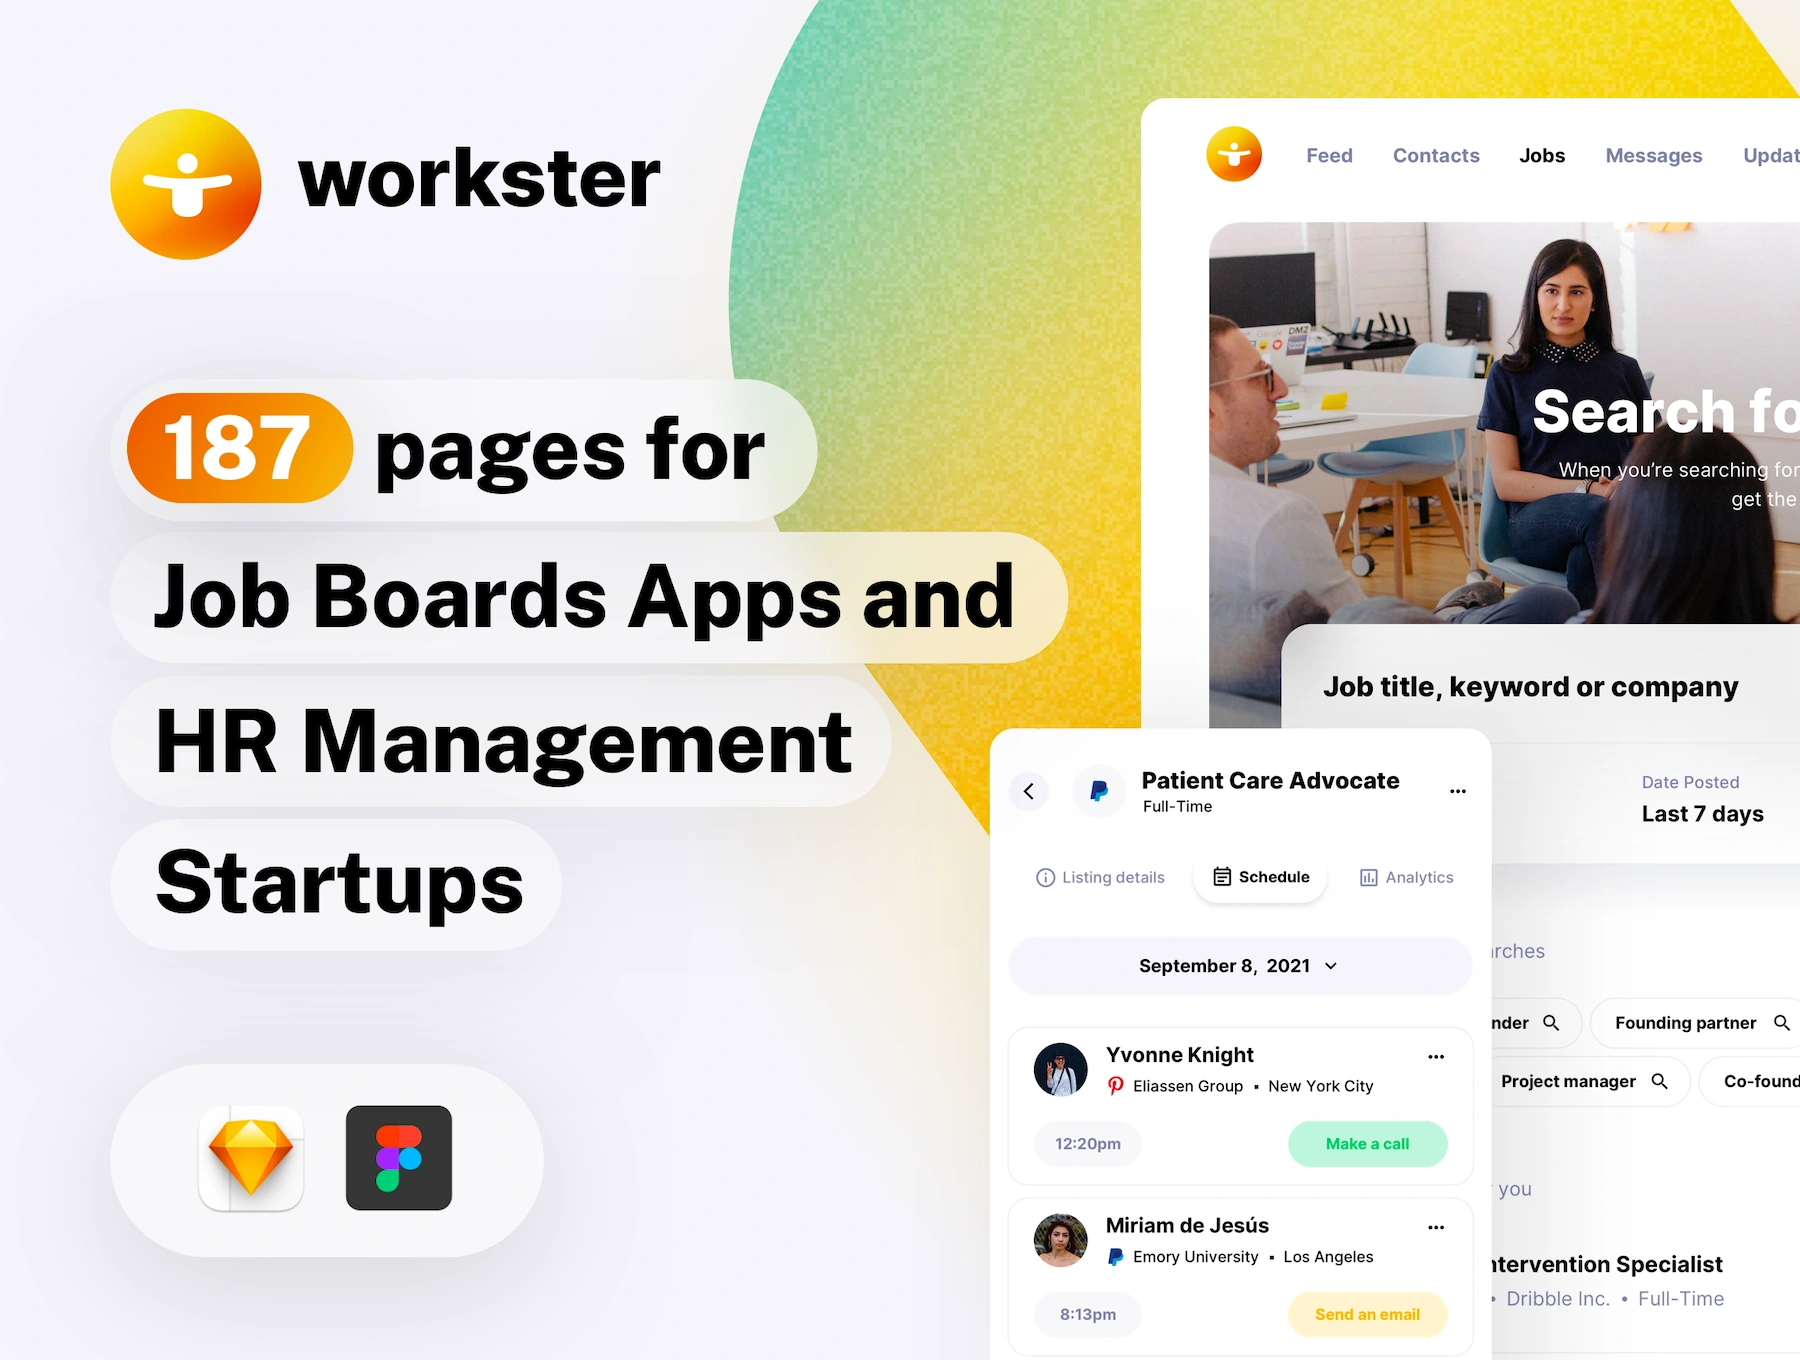 [VIP] Workster: UI kit for Job Boards